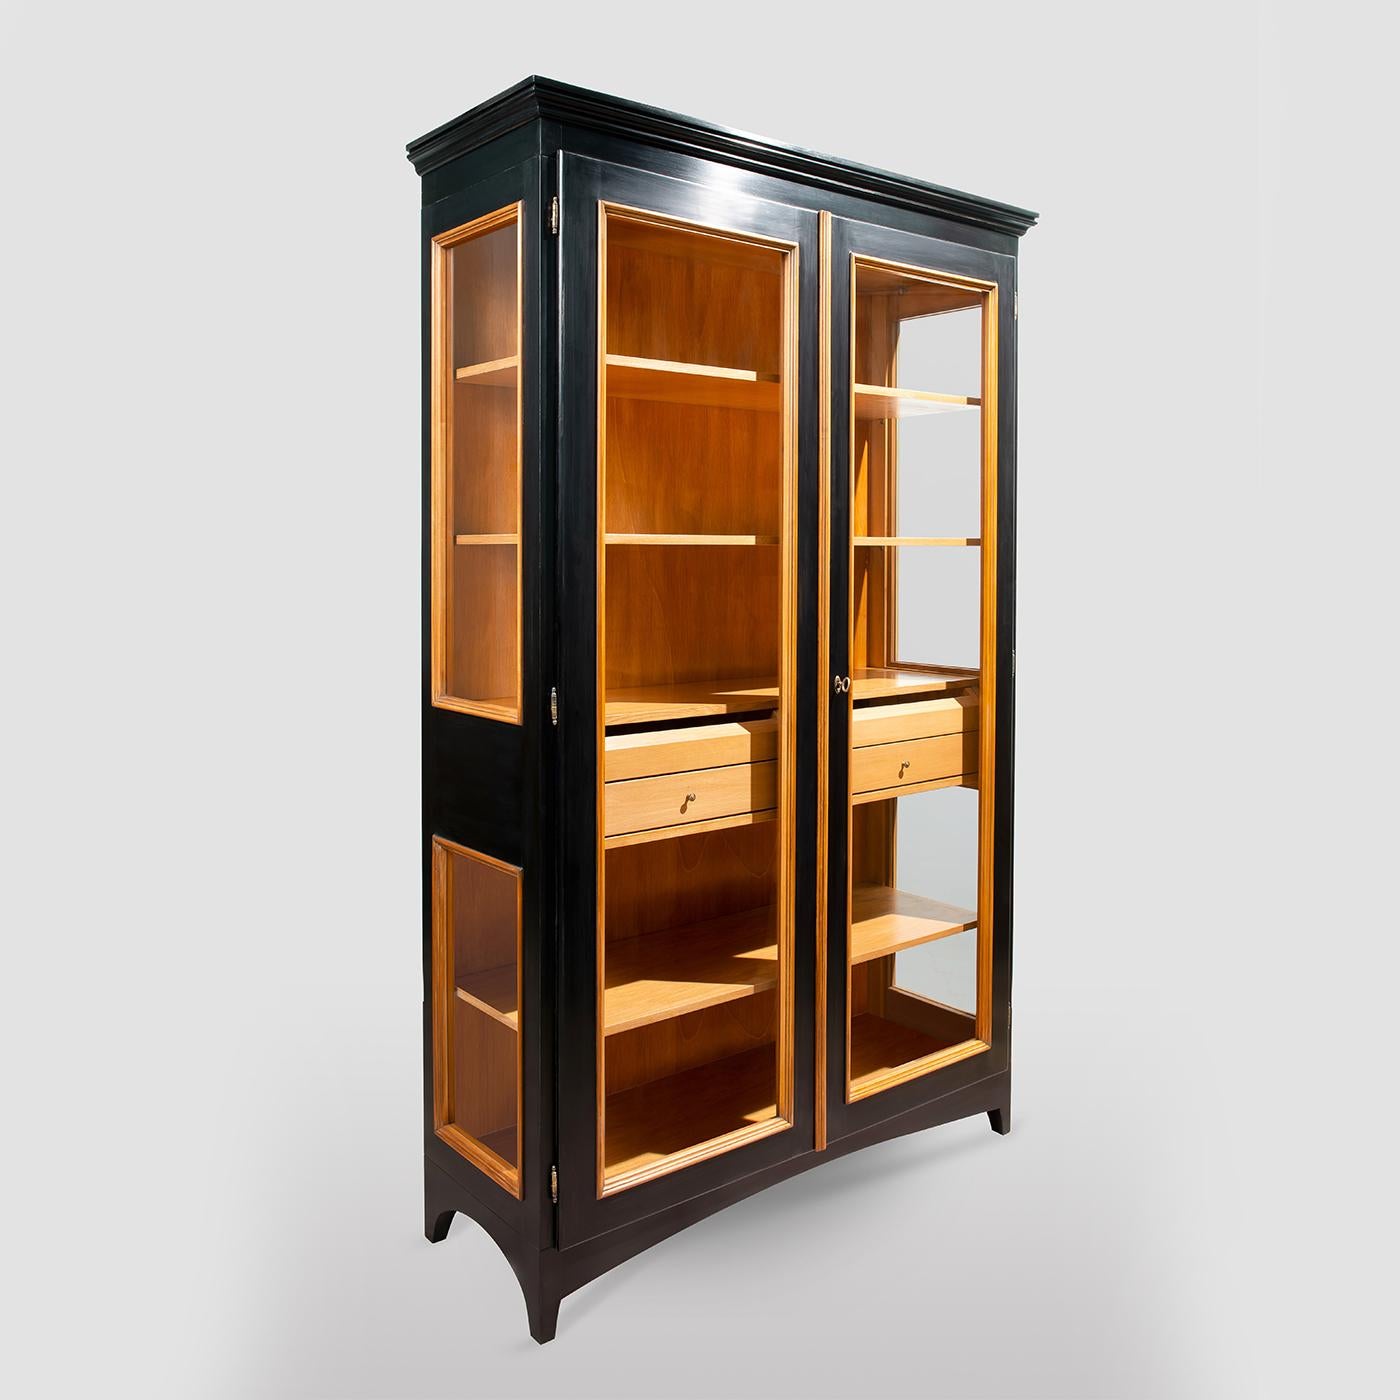 Merging contemporary aesthetic and Italian cabinet-making tradition, this striking display cabinet delivers a masterclass in modern Italian furniture design. The tall Toulipier wood frame features two front glass doors and lateral glass panels to